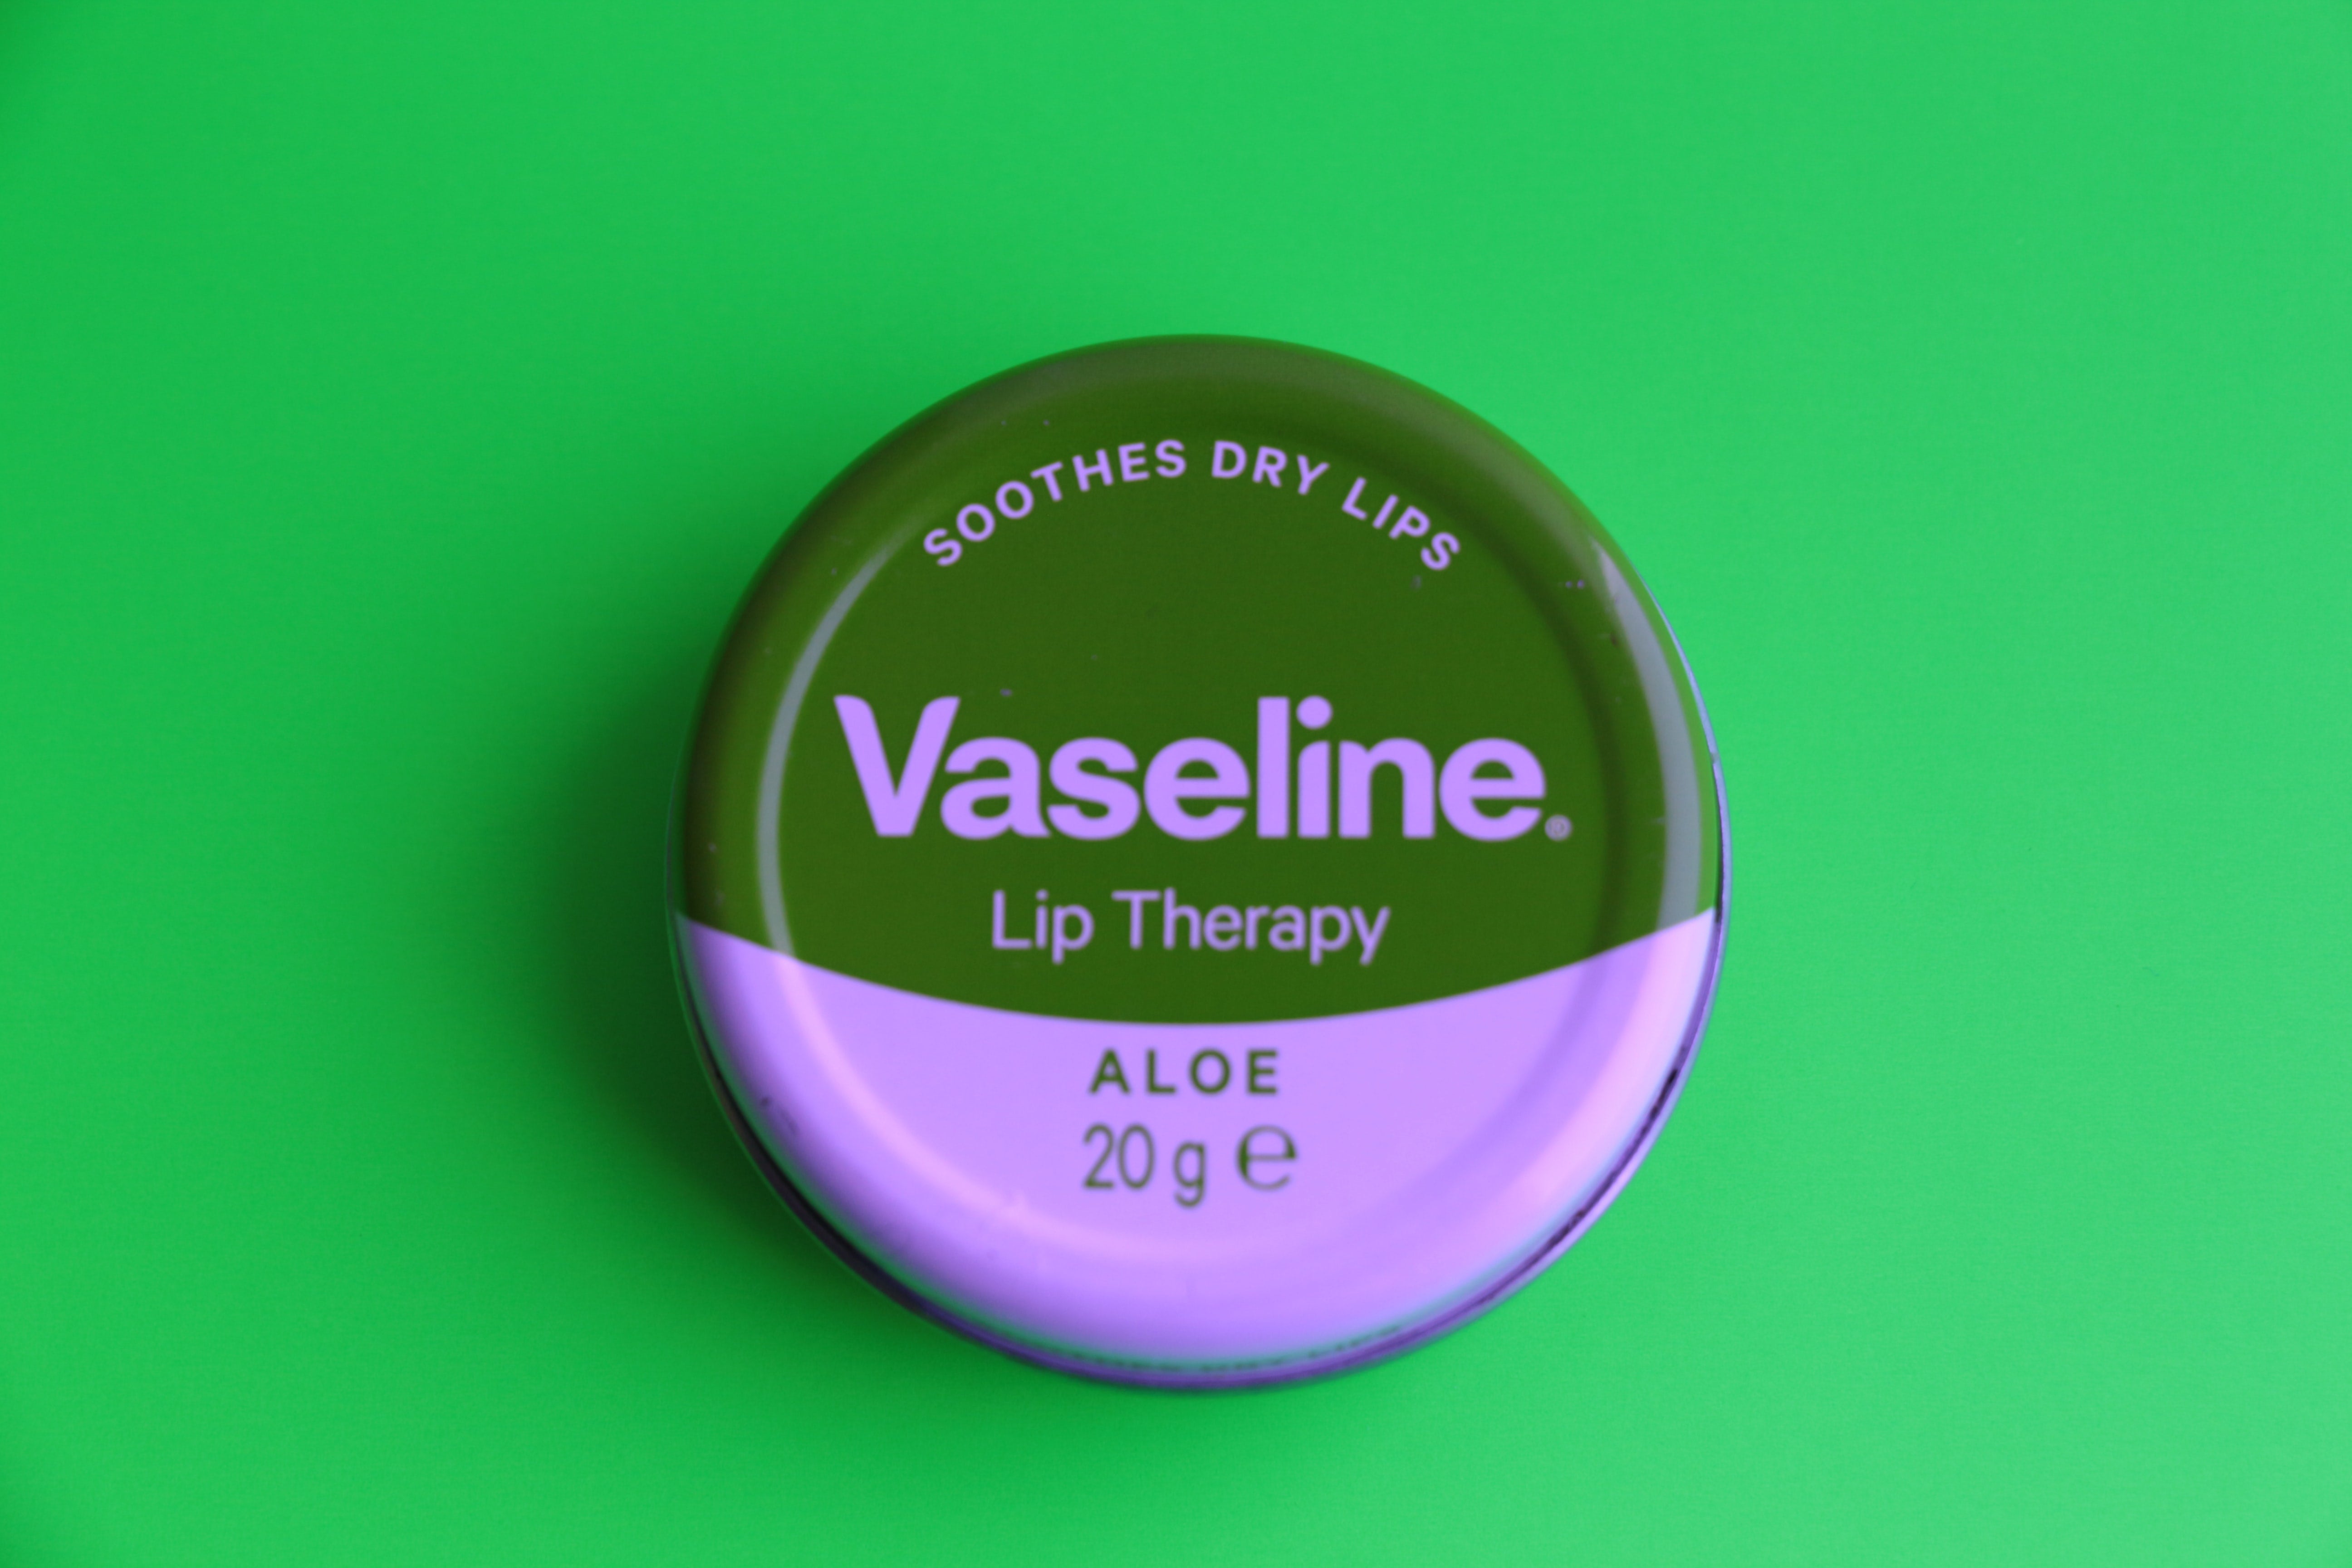 Using Vaseline on your face: Benefits and risks